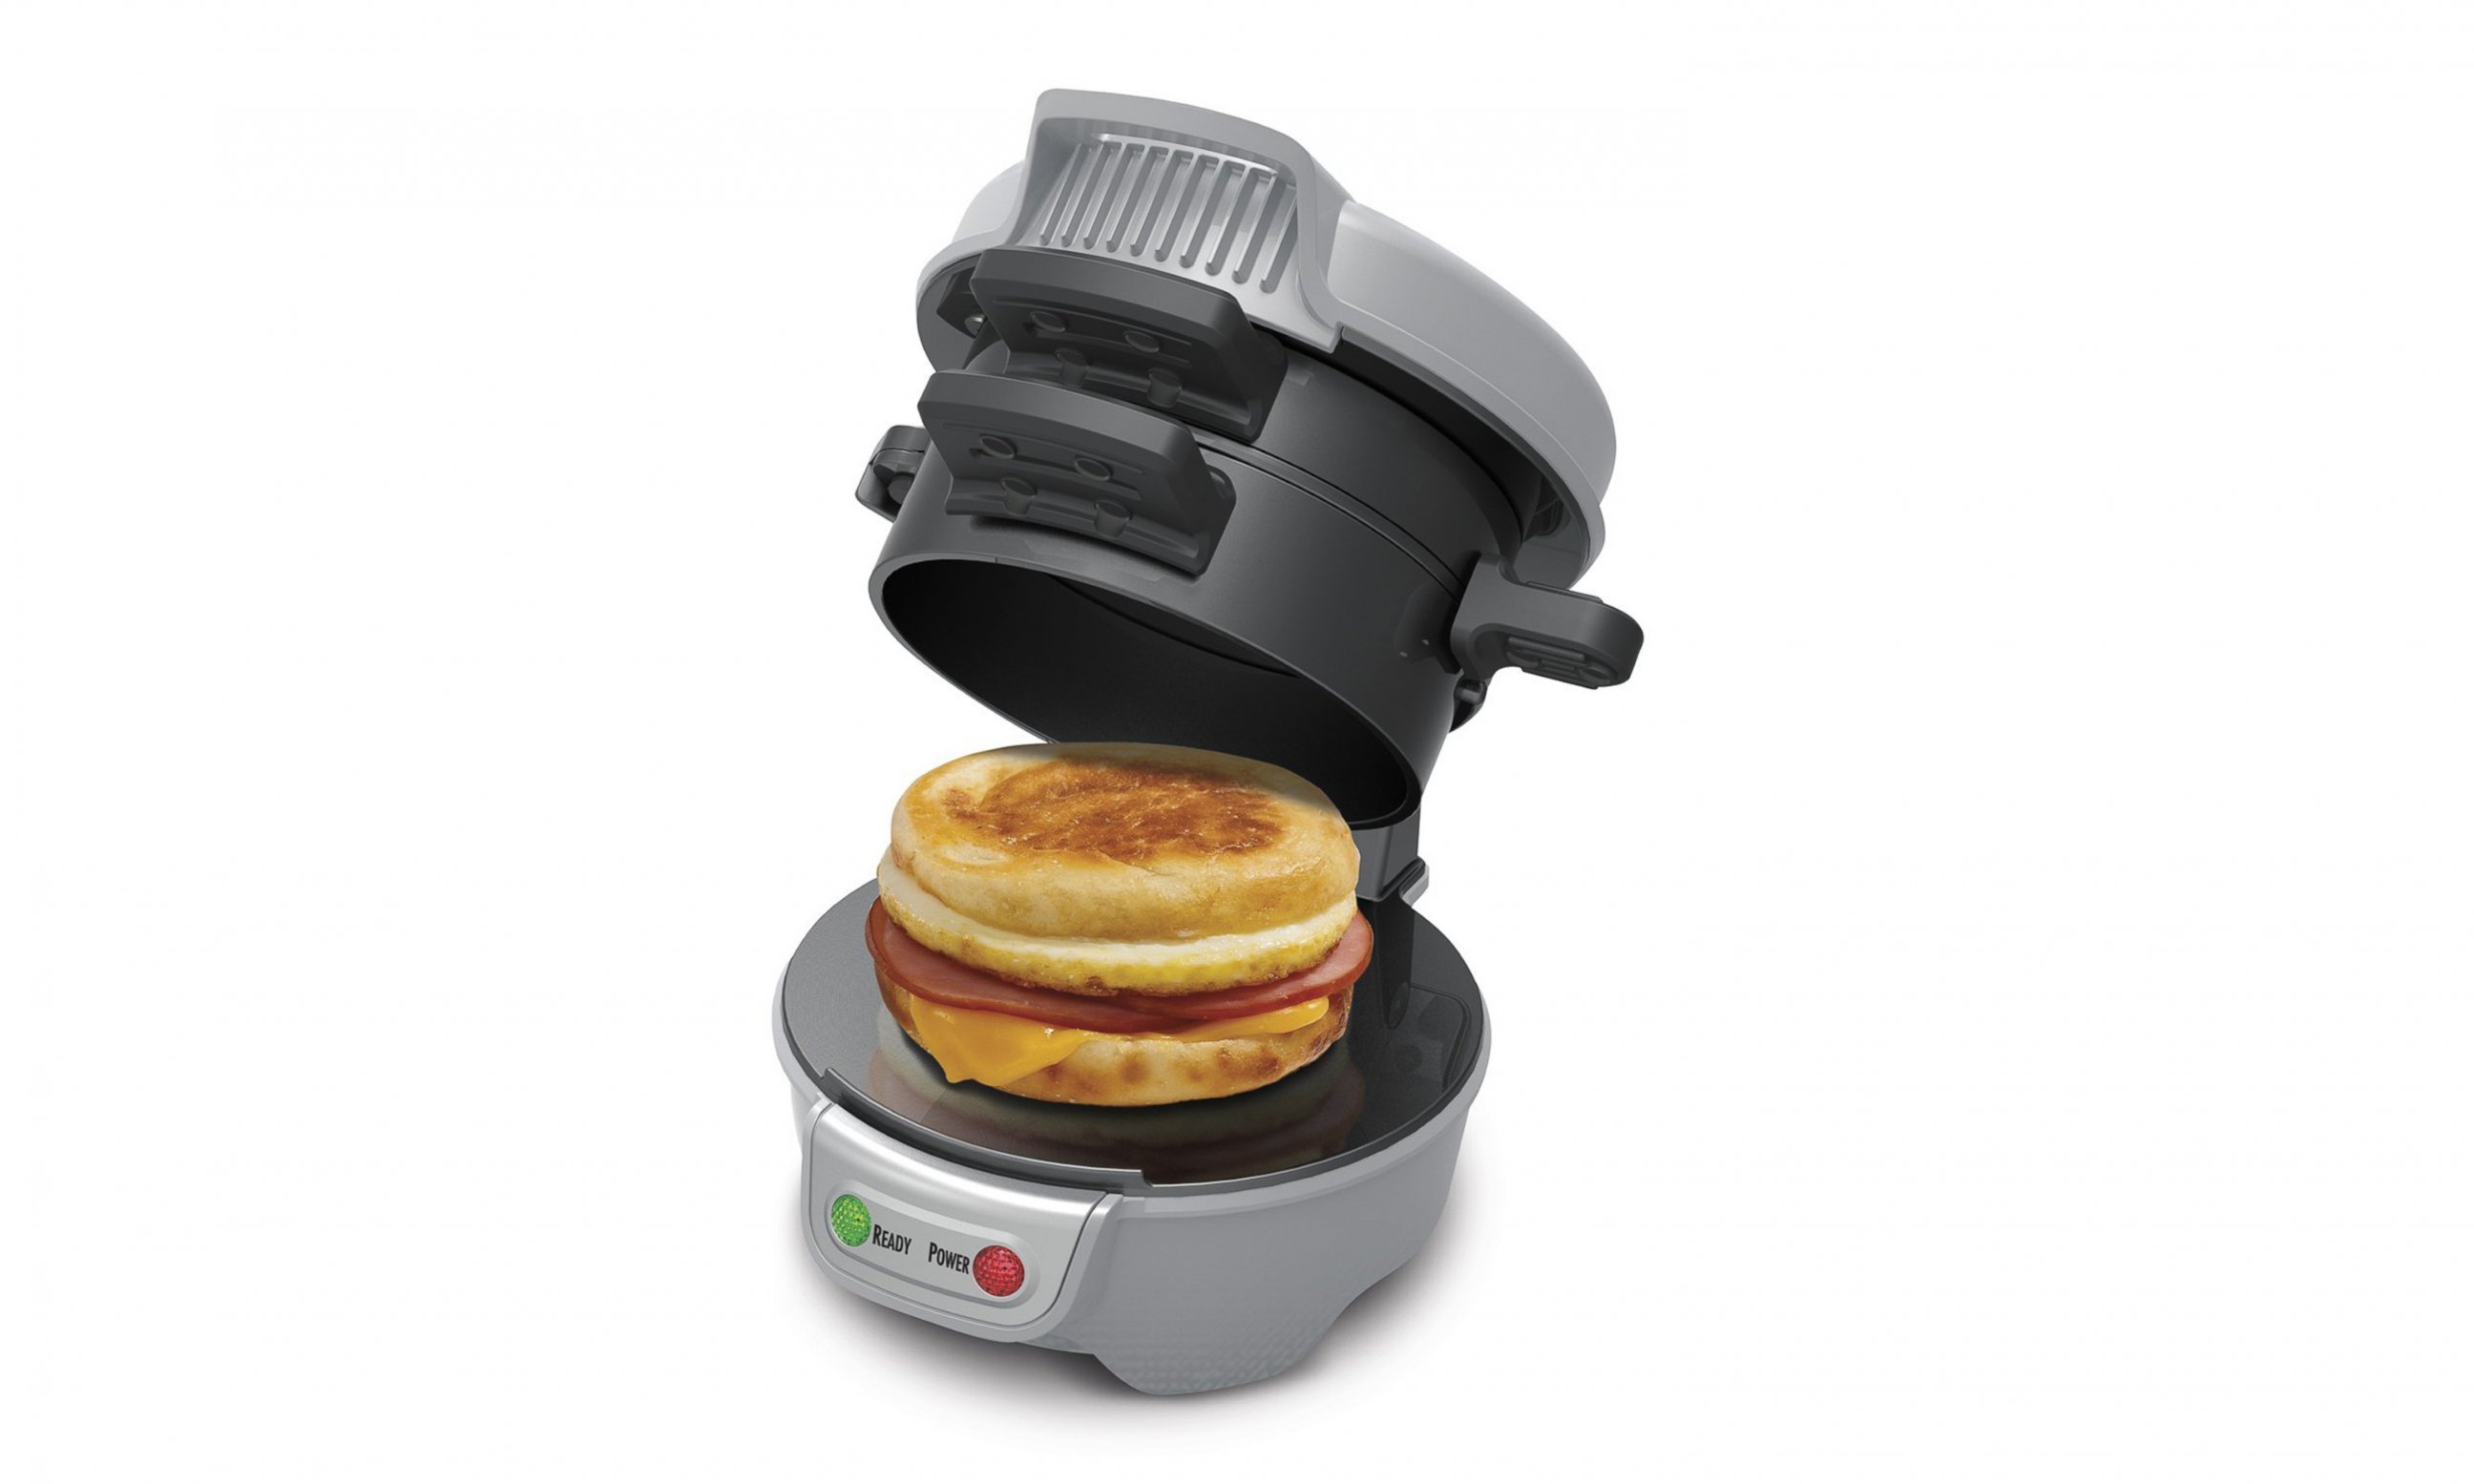 PHOTO: The Hamilton Beach breakfast sandwich maker cooks and assembles your sandwich in just a few easy steps.